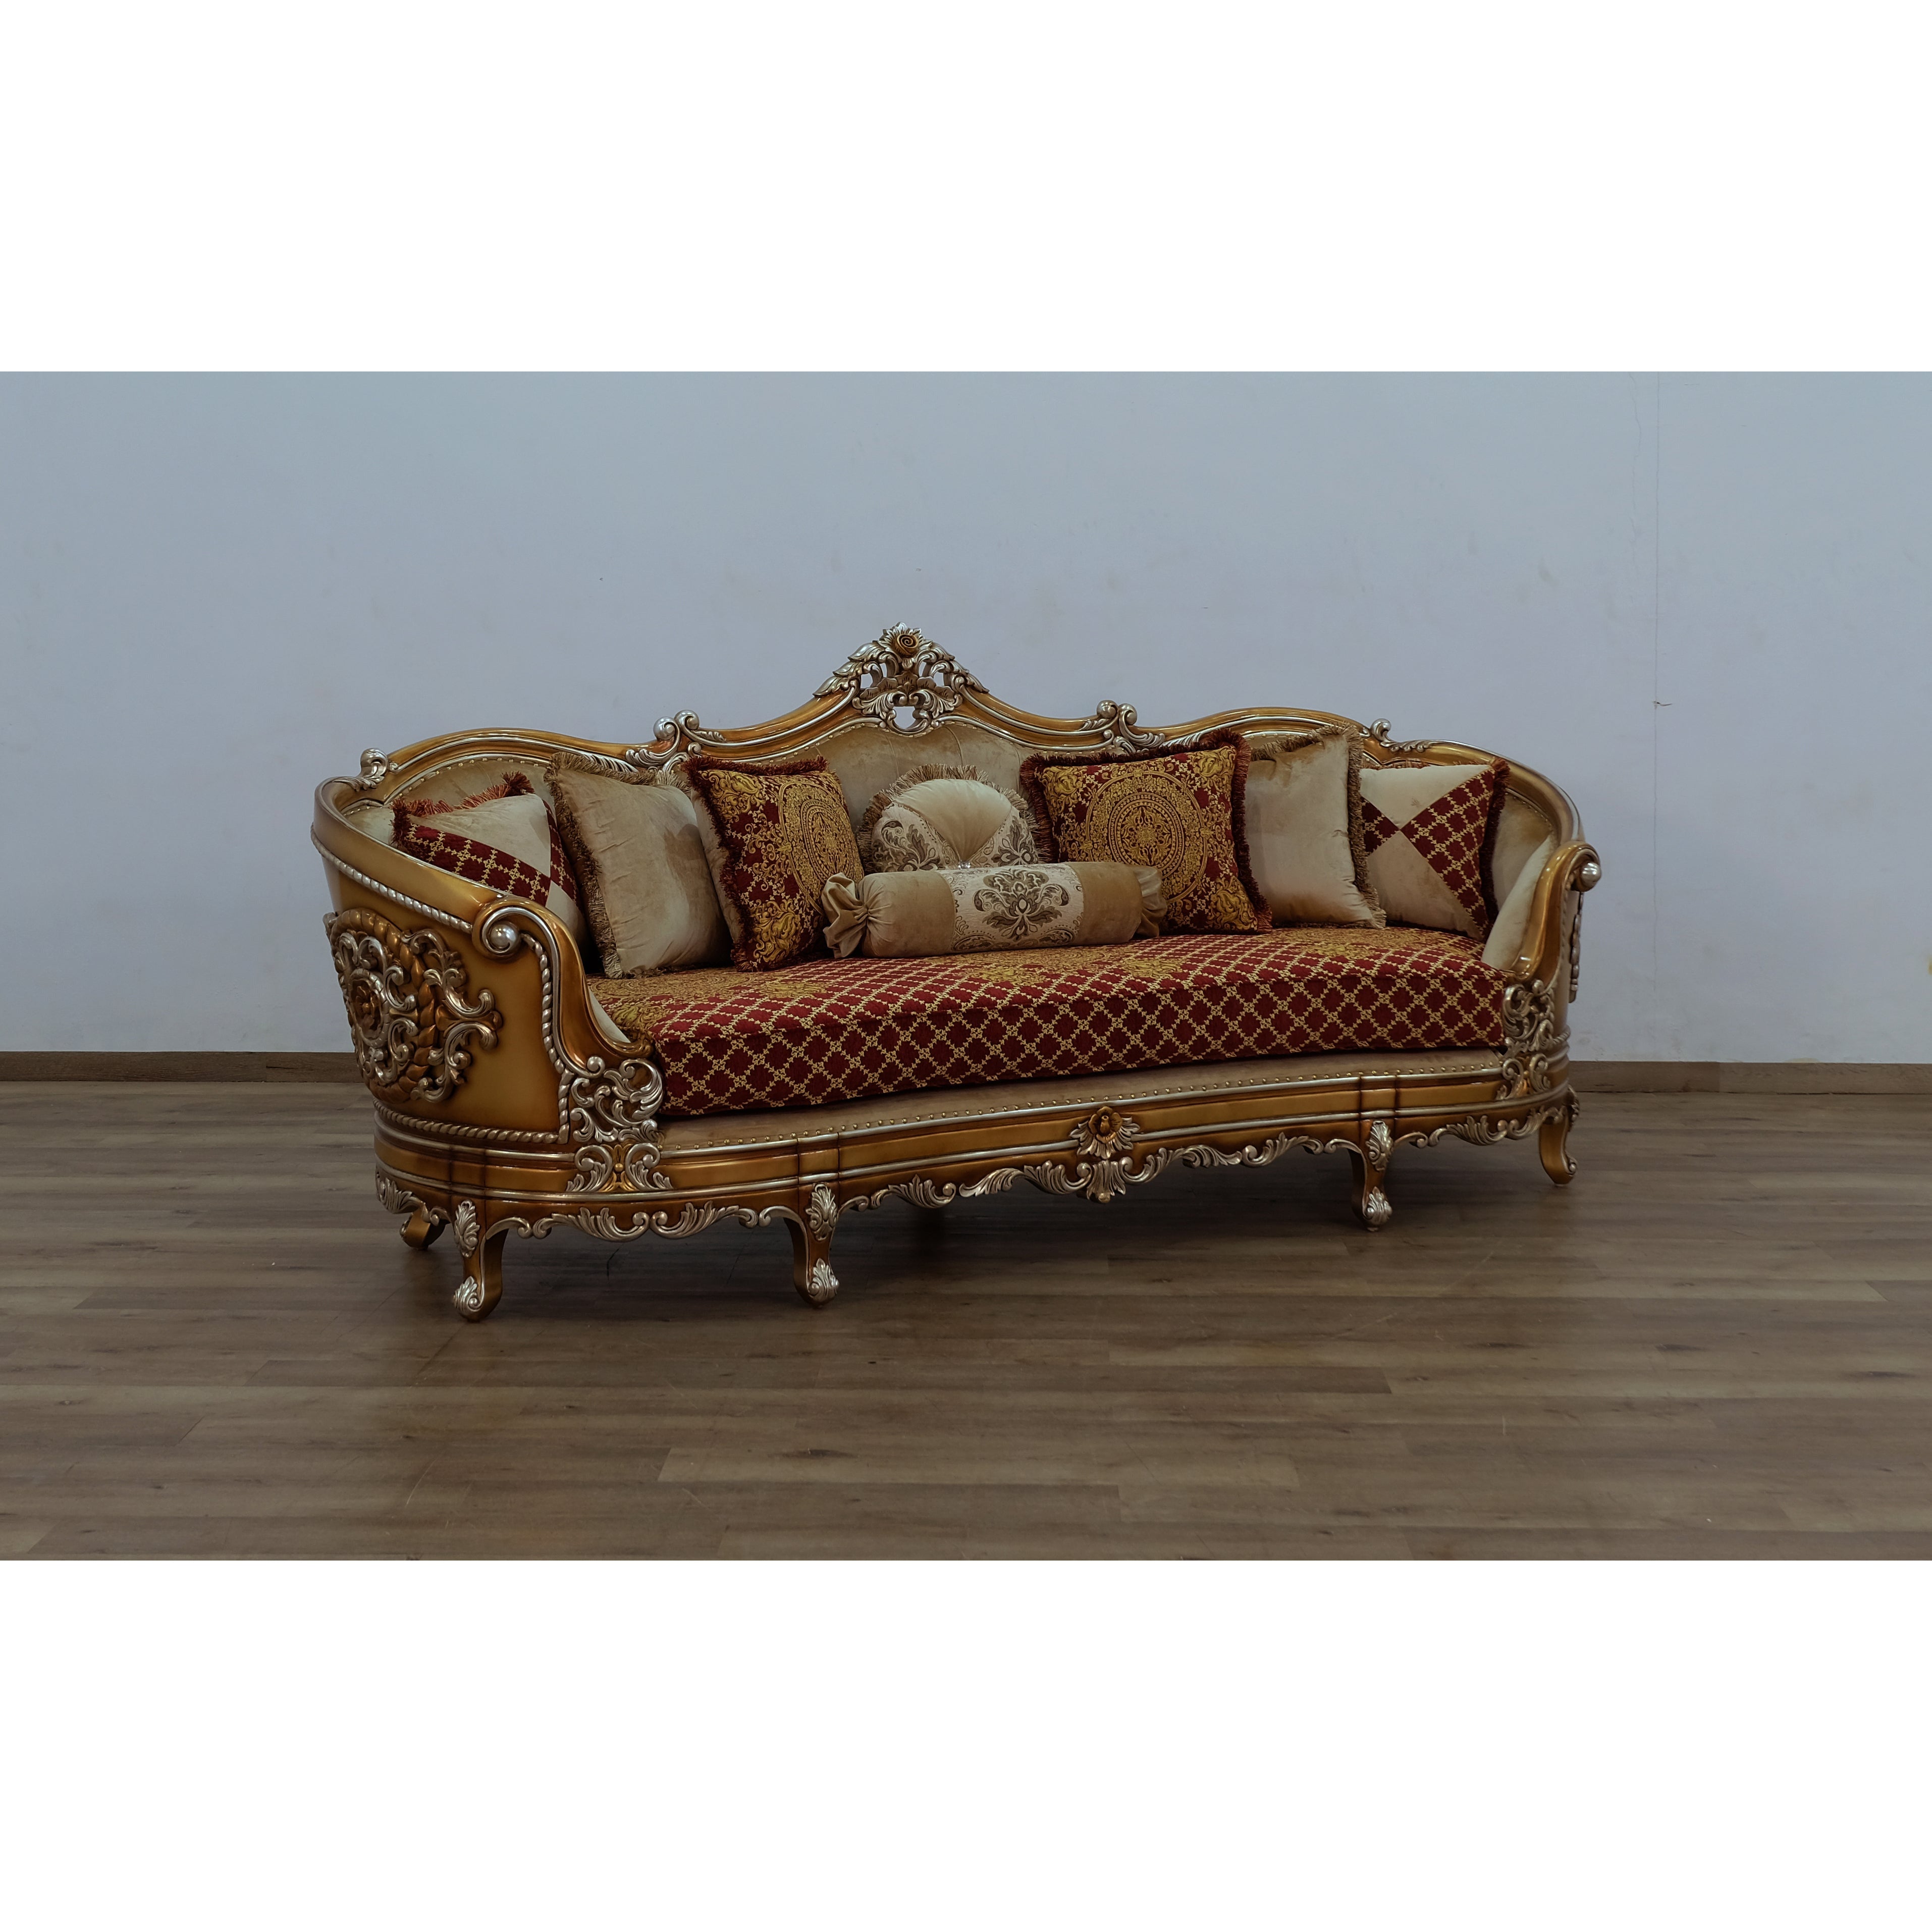 European Furniture - Saint Germain 3 Piece Luxury Living Room Set in Red Gold & Antique Silver - 35554-SLC - New Star Living